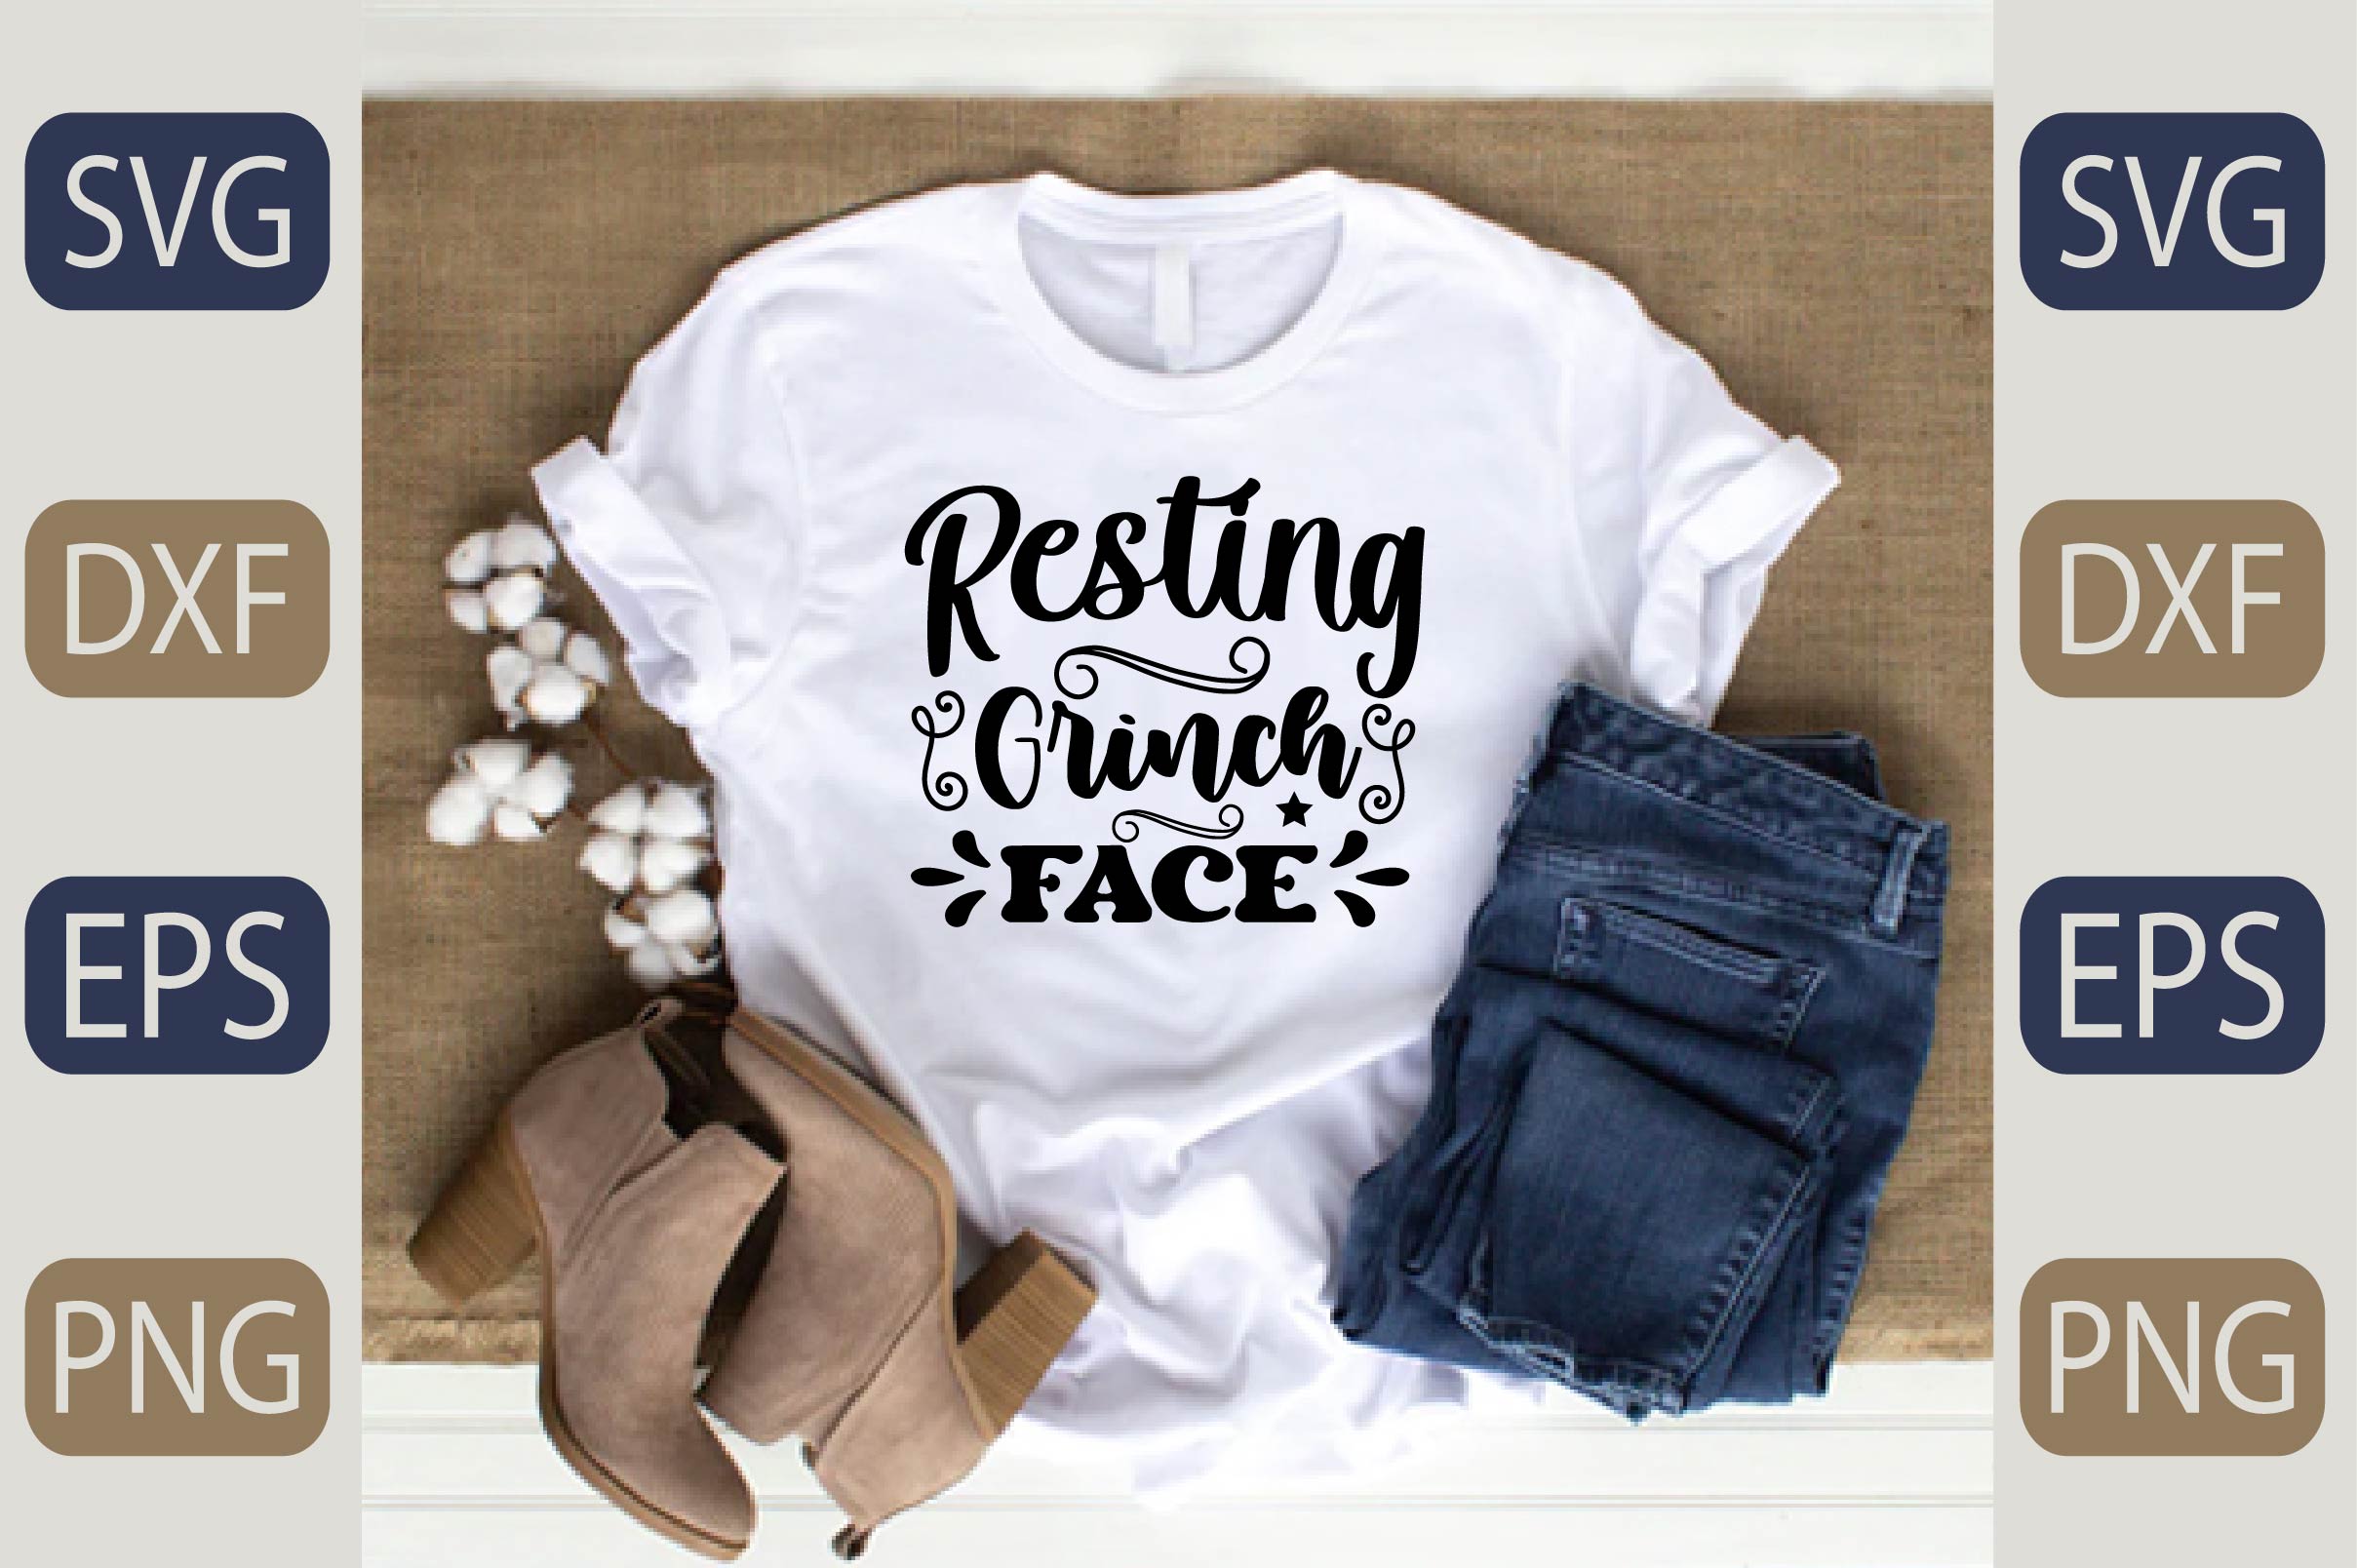 T - shirt that says resting church face next to a pair of jeans and.